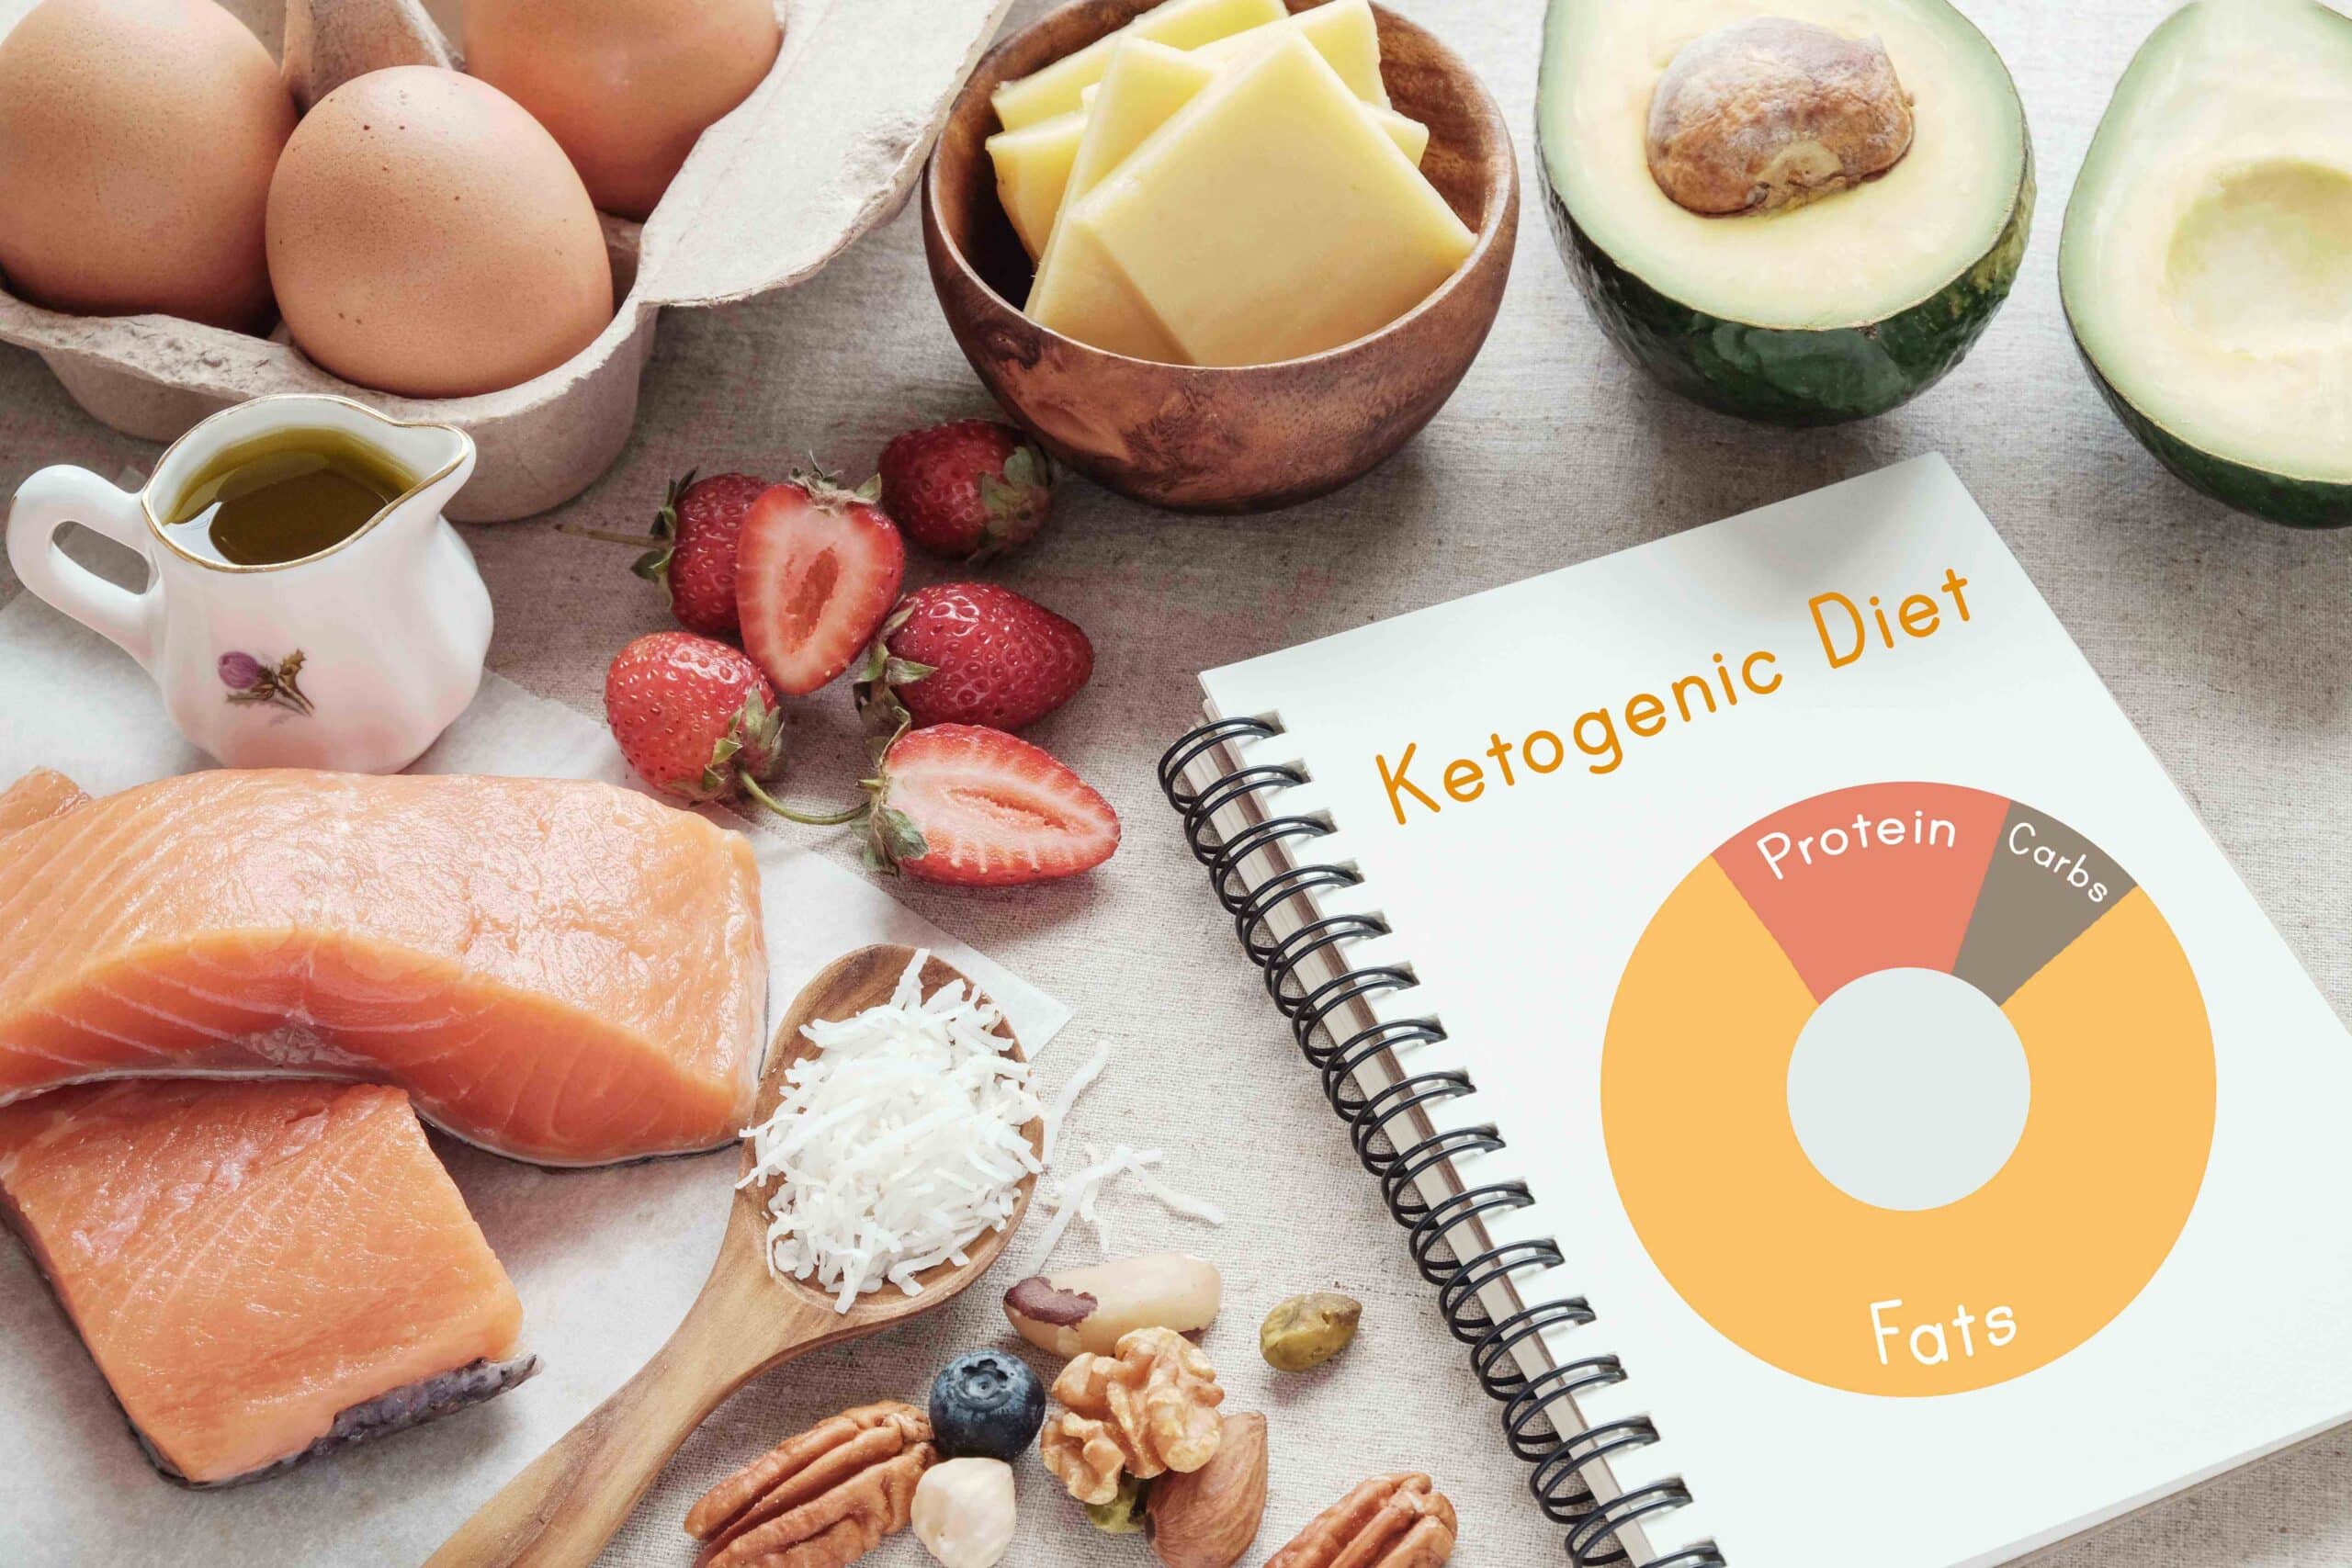 Keto Diet: Six pointers one must follow